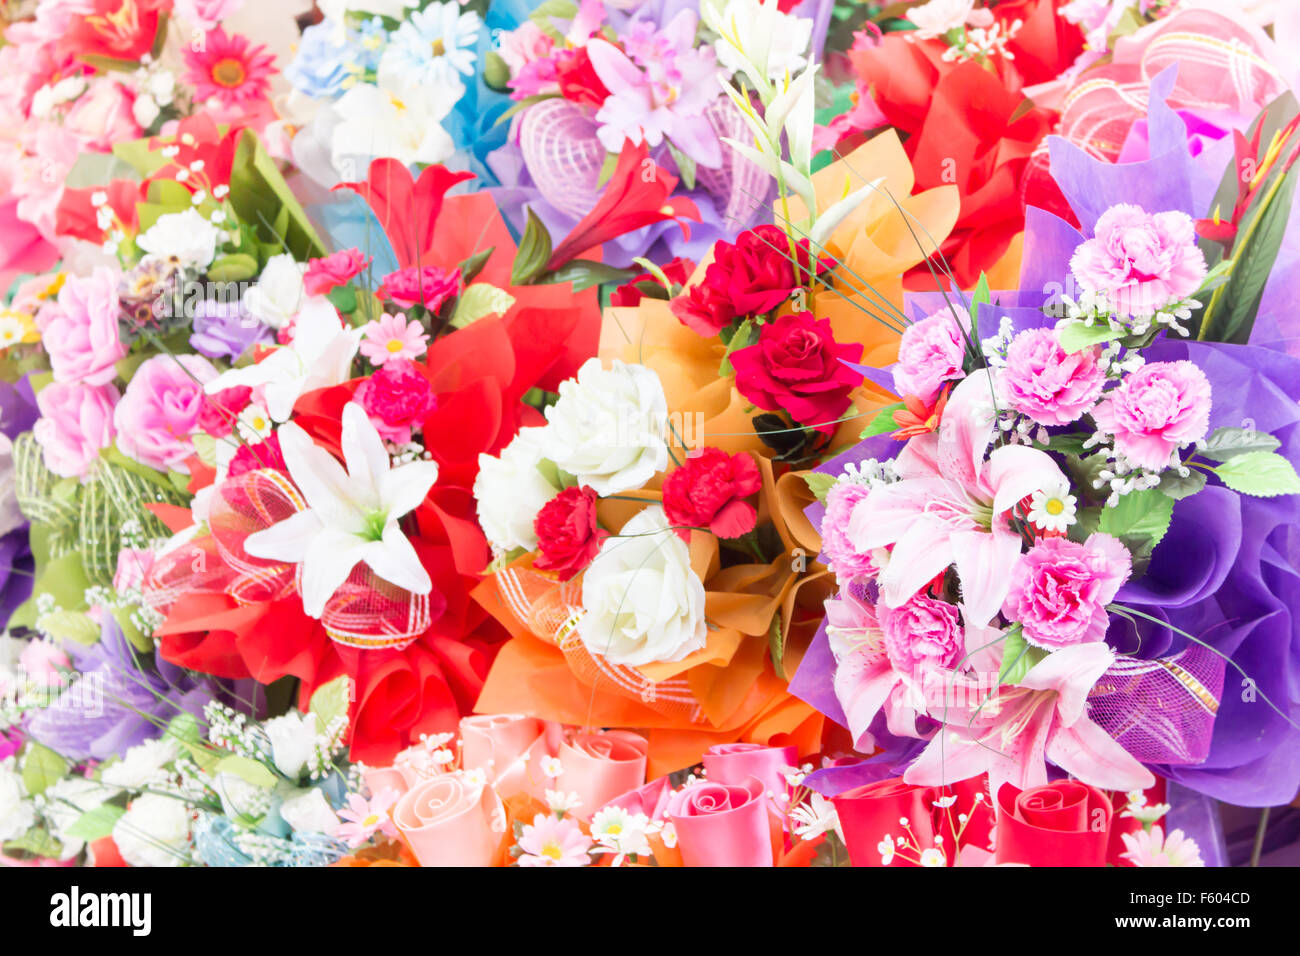 Artificial flower background select focus Stock Photo